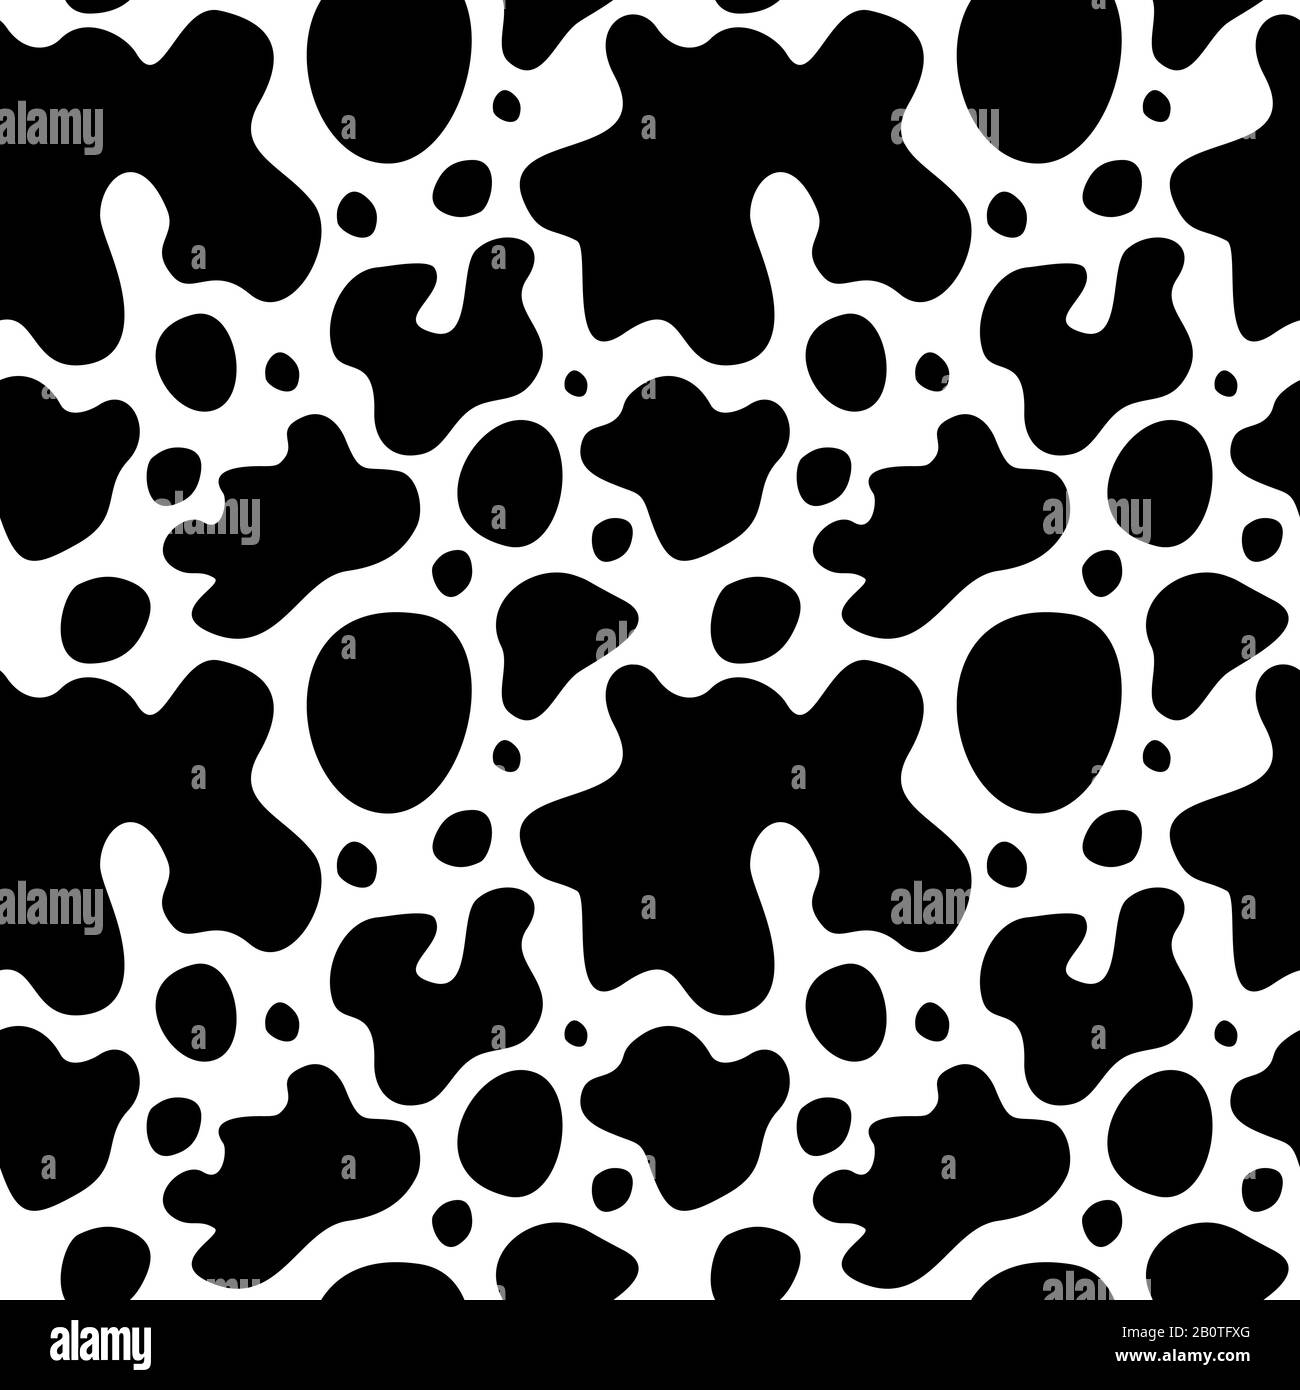 Cow skin texture with spots vector seamless pattern. Cow pattern skin, illustration of dalmatian pattern skin Stock Vector